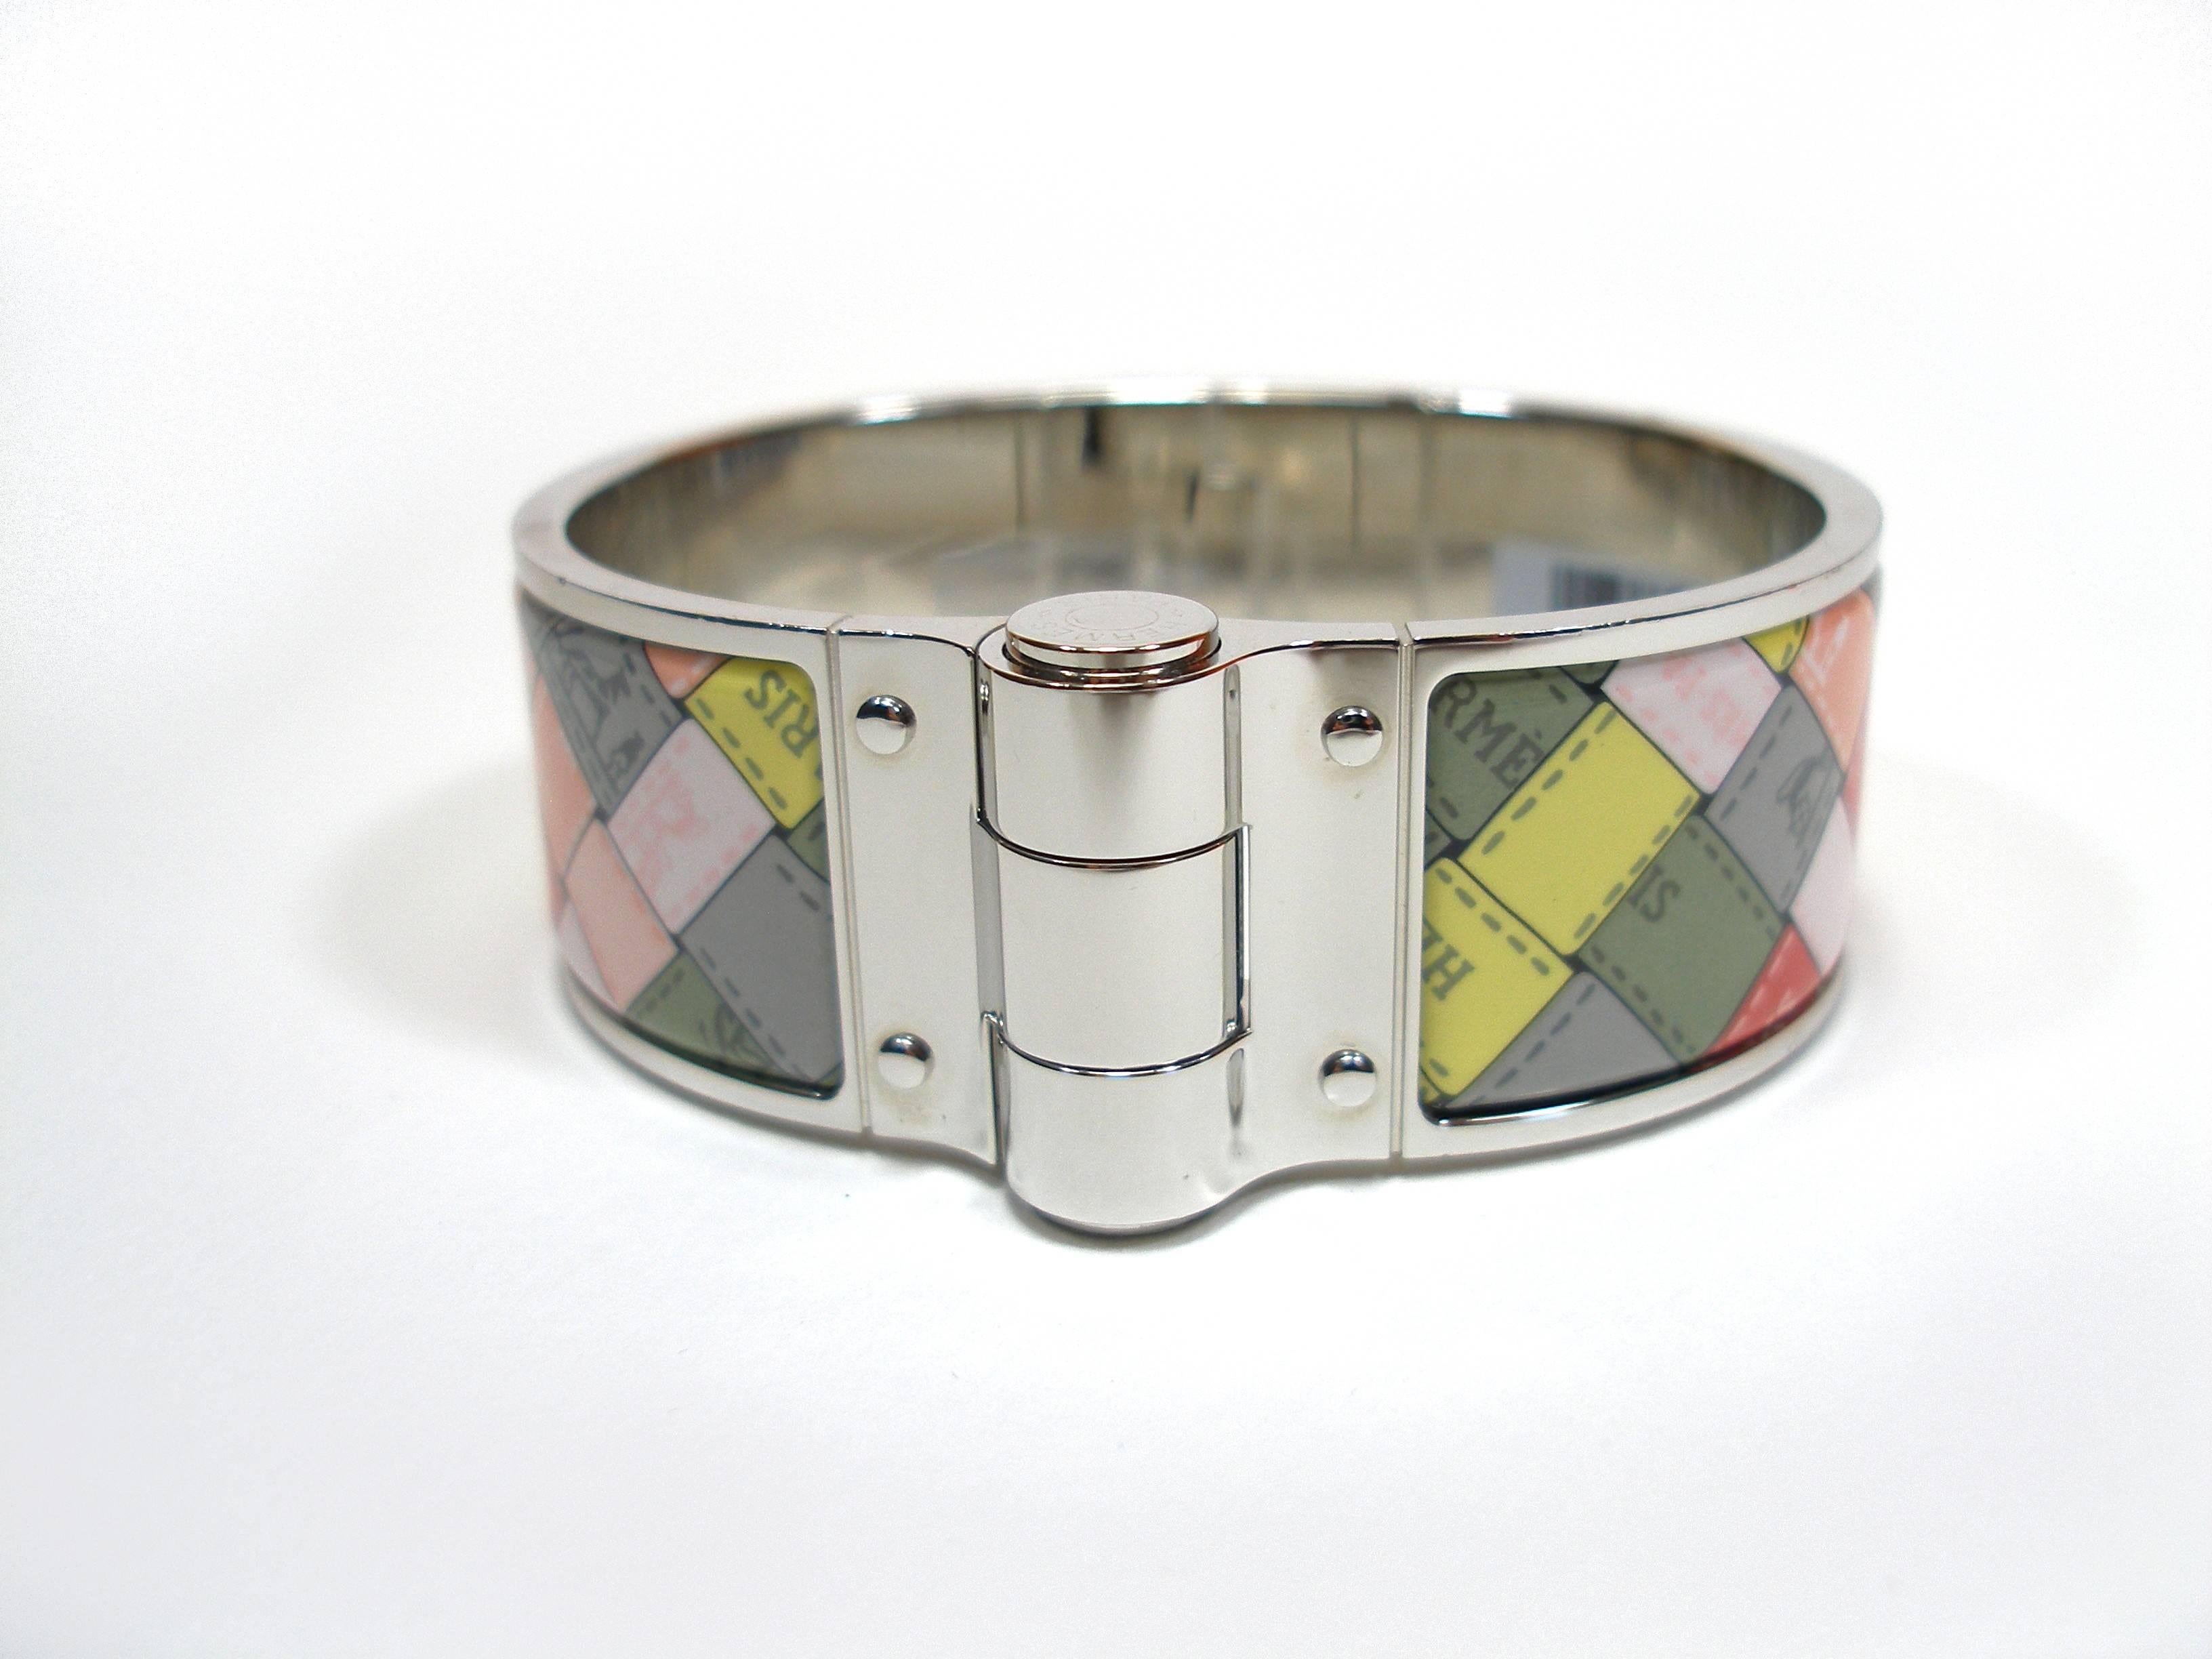 New Collection Hermès 
Hermes hinged bracelet in printed enamel
Palladium plated hardware 
Bolduc au carré Romantique
Diametre inside : approx 6 cm or 2.36 inches
It's comes with Hermès shopping bag Hermès and ribbon for XMAS
INTERNATIOANALS BUYERS